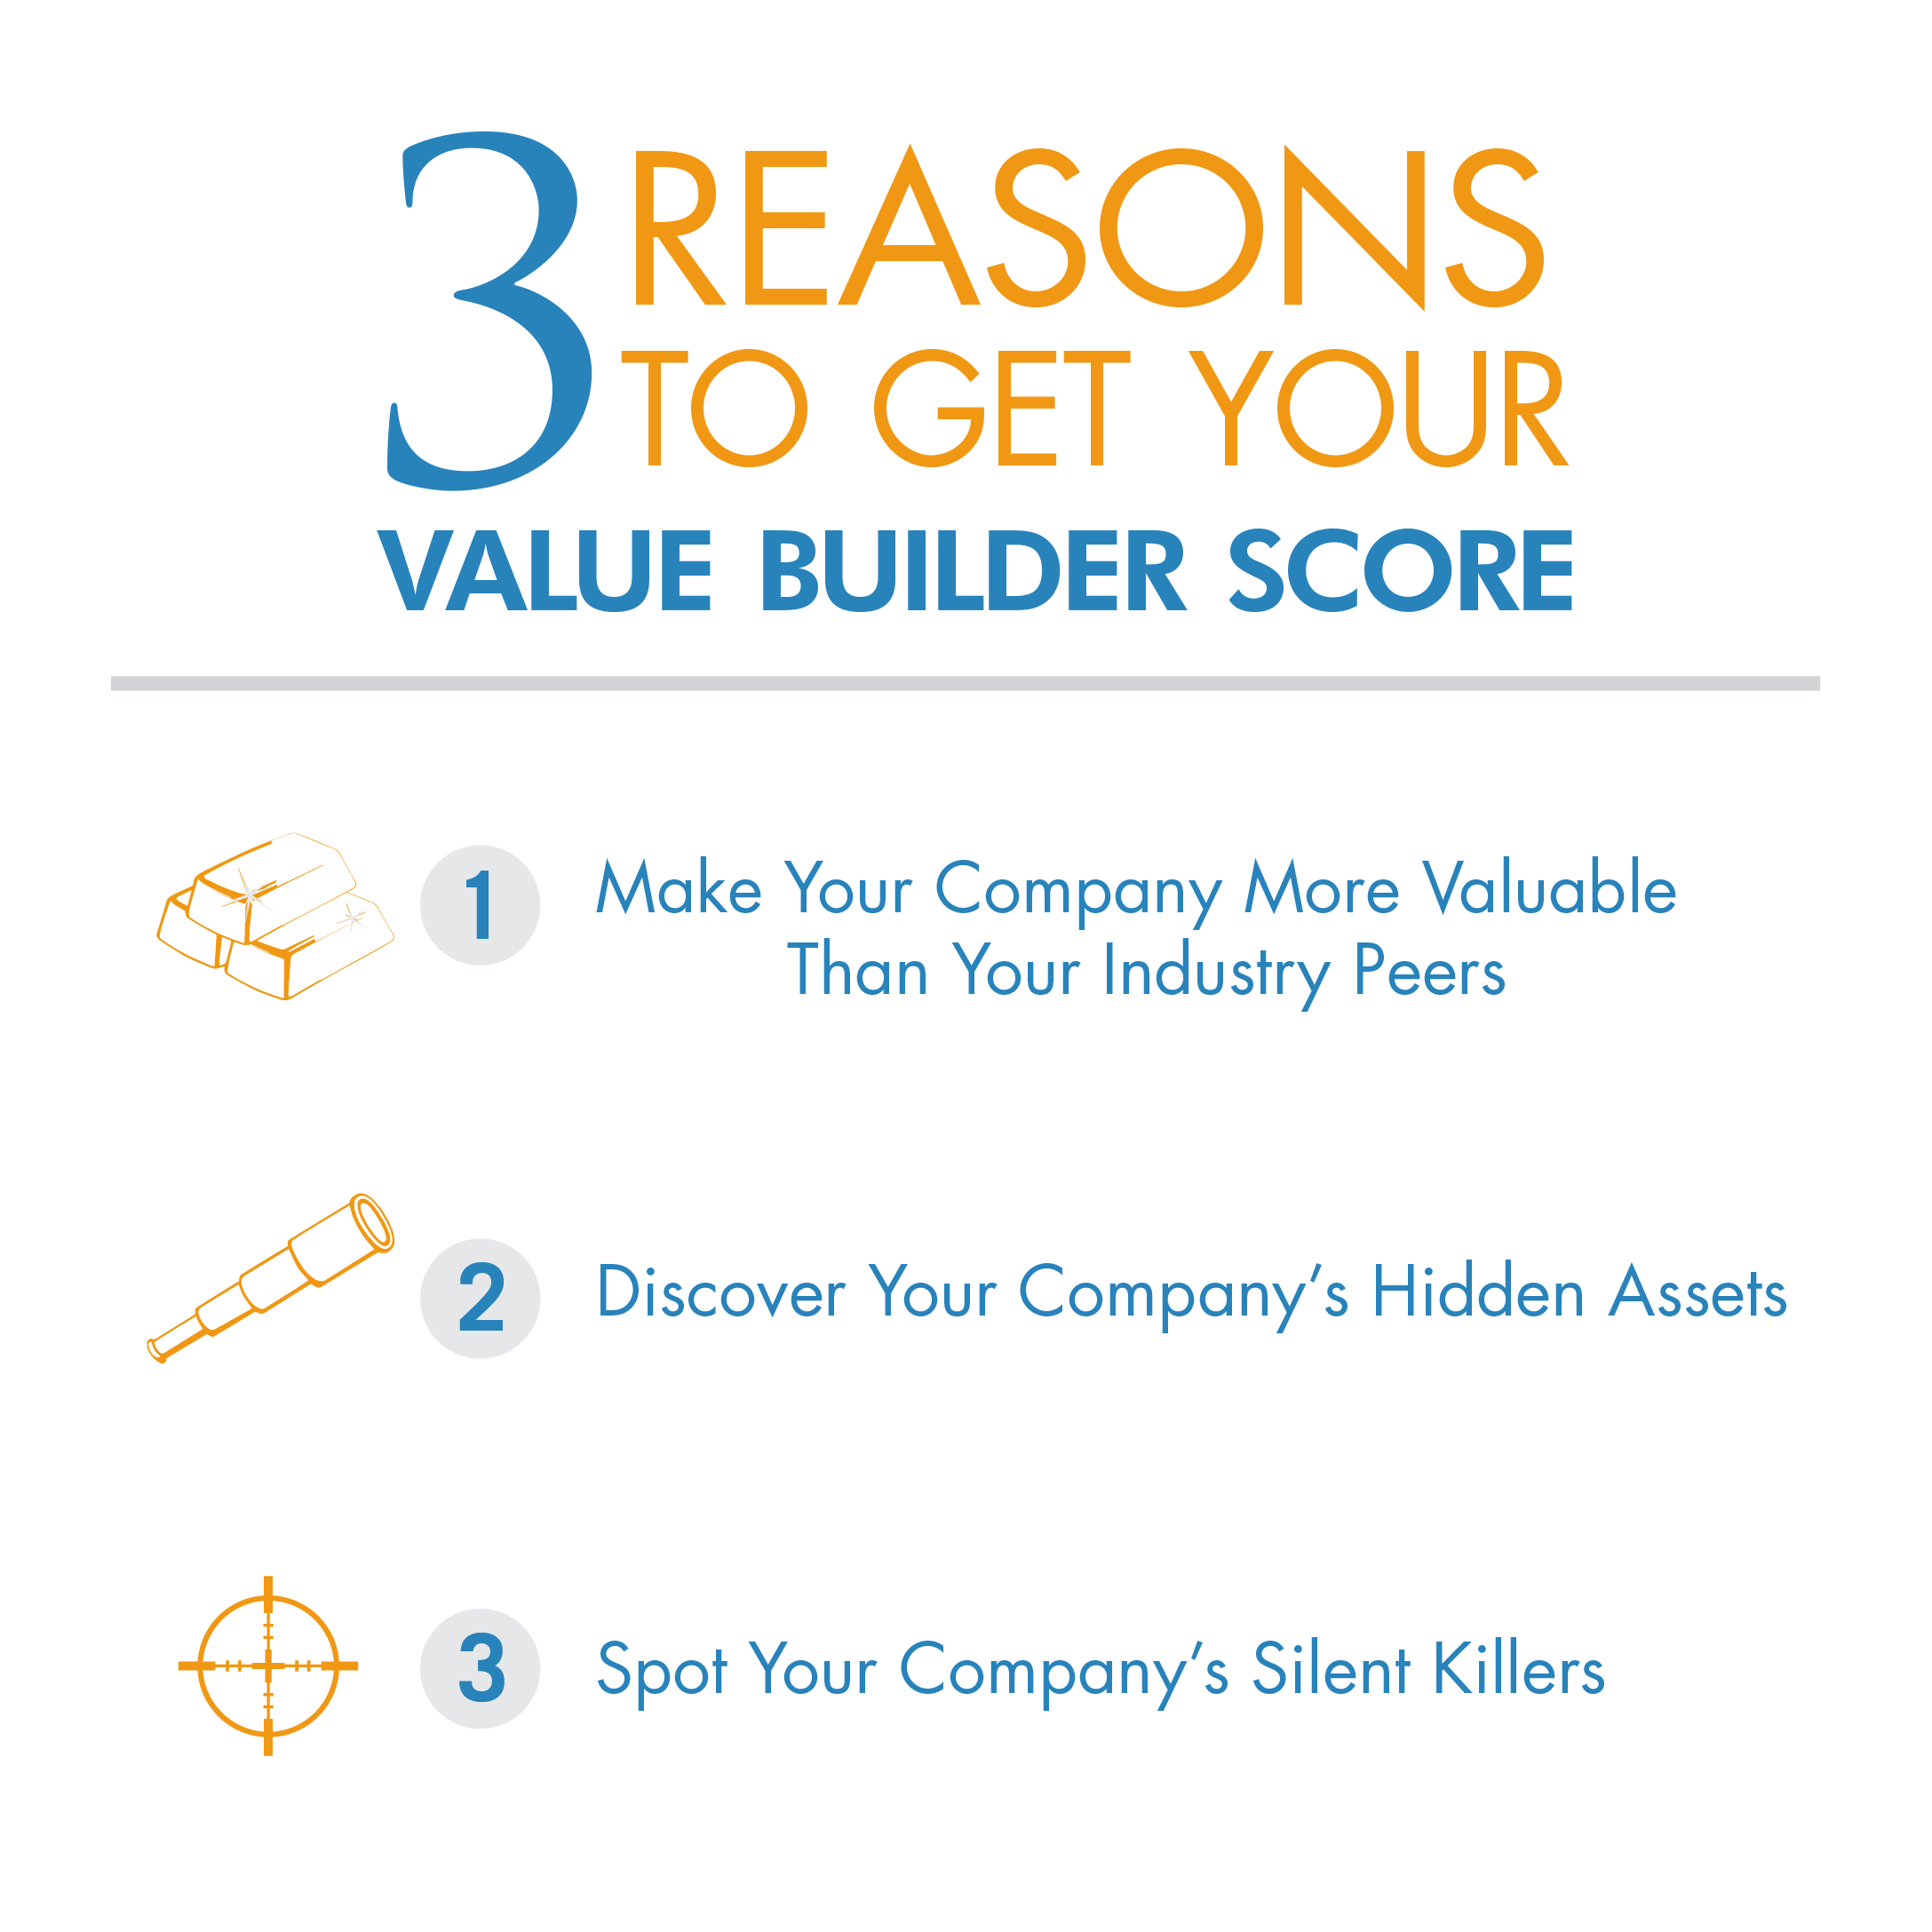 Get your value builder score to make your company more valuable